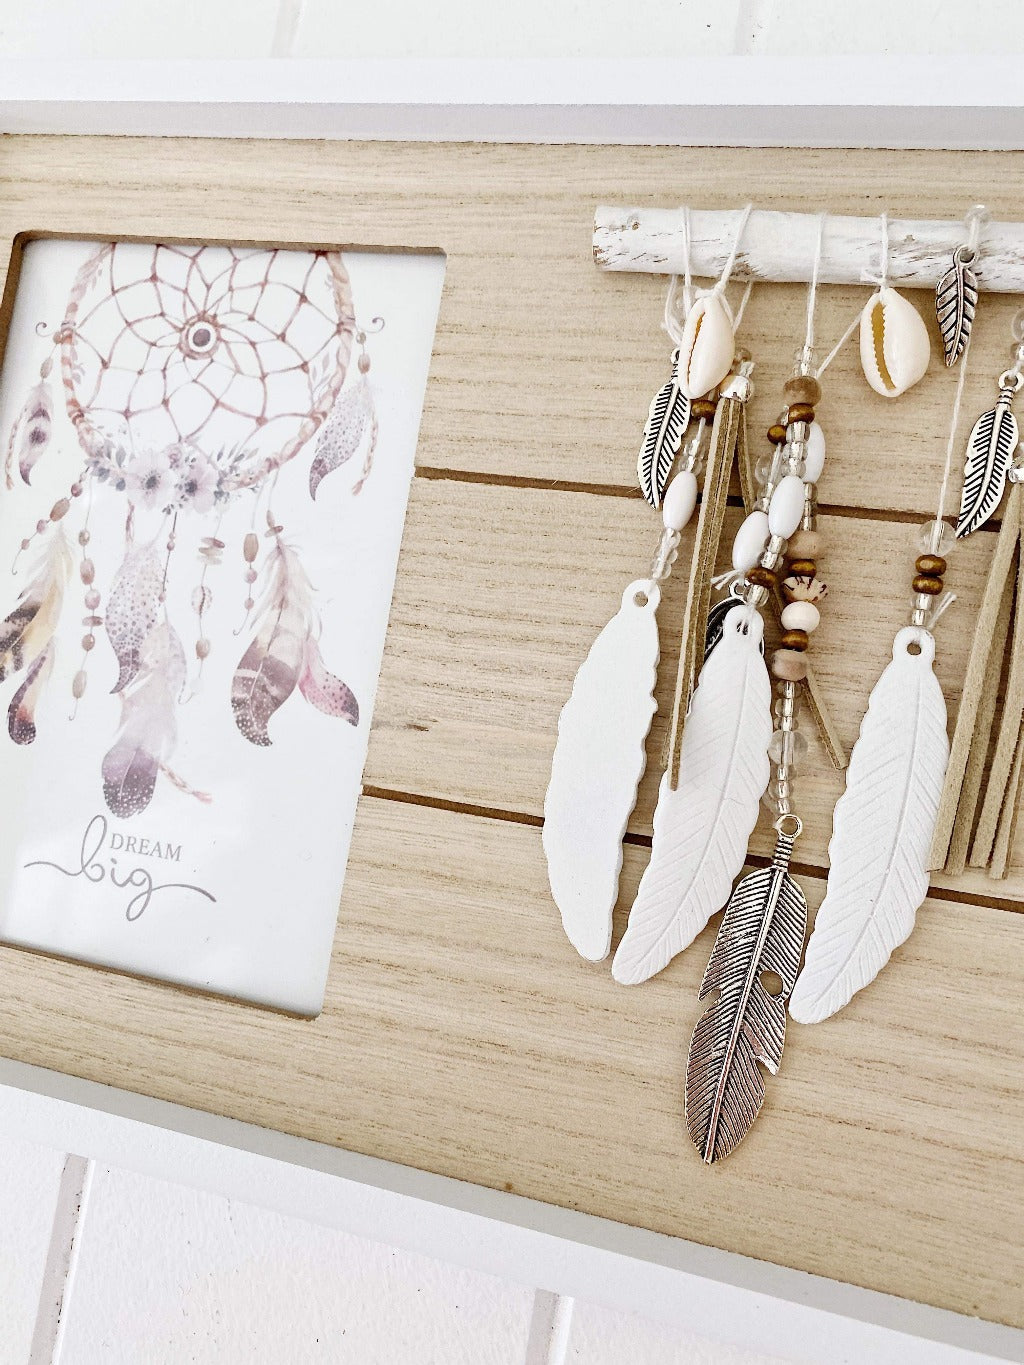 Our Twin Dreamcatcher Framed Print makes a great styling accessory for your bedroom, lounge room or office, bringing a bohemian vibe into your space. Measures approx: 40x21cm. Shop online. AfterPay available. Australia wide Shipping | Bliss Gifts &amp; Homewares - Unit 8, 259 Princes Hwy Ulladulla - 0427795959, 44541523